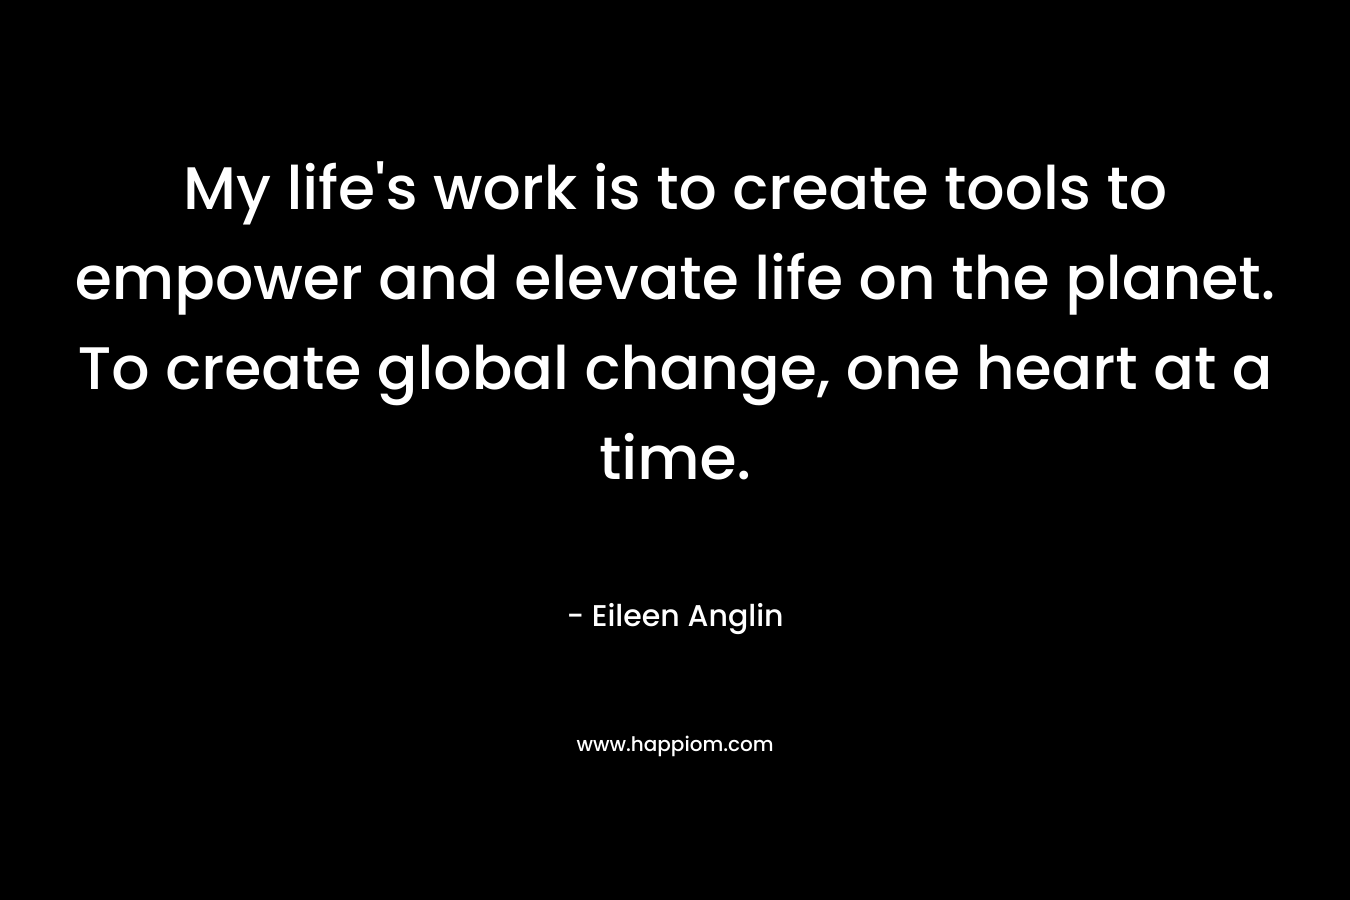 My life's work is to create tools to empower and elevate life on the planet. To create global change, one heart at a time.